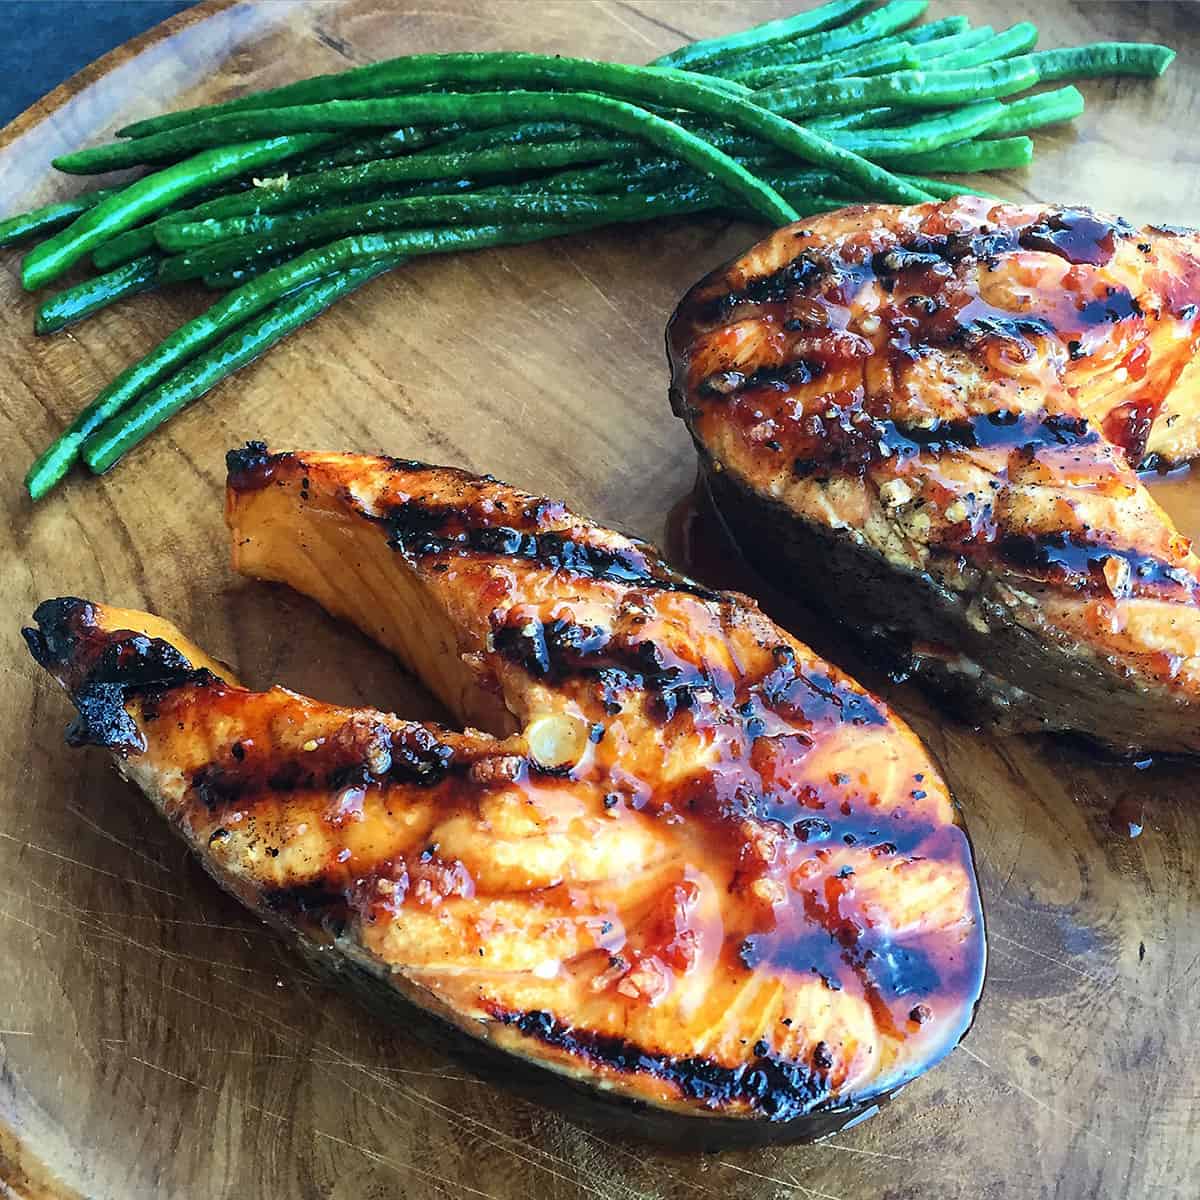 grilled salmon with cherry glaze near green beans.